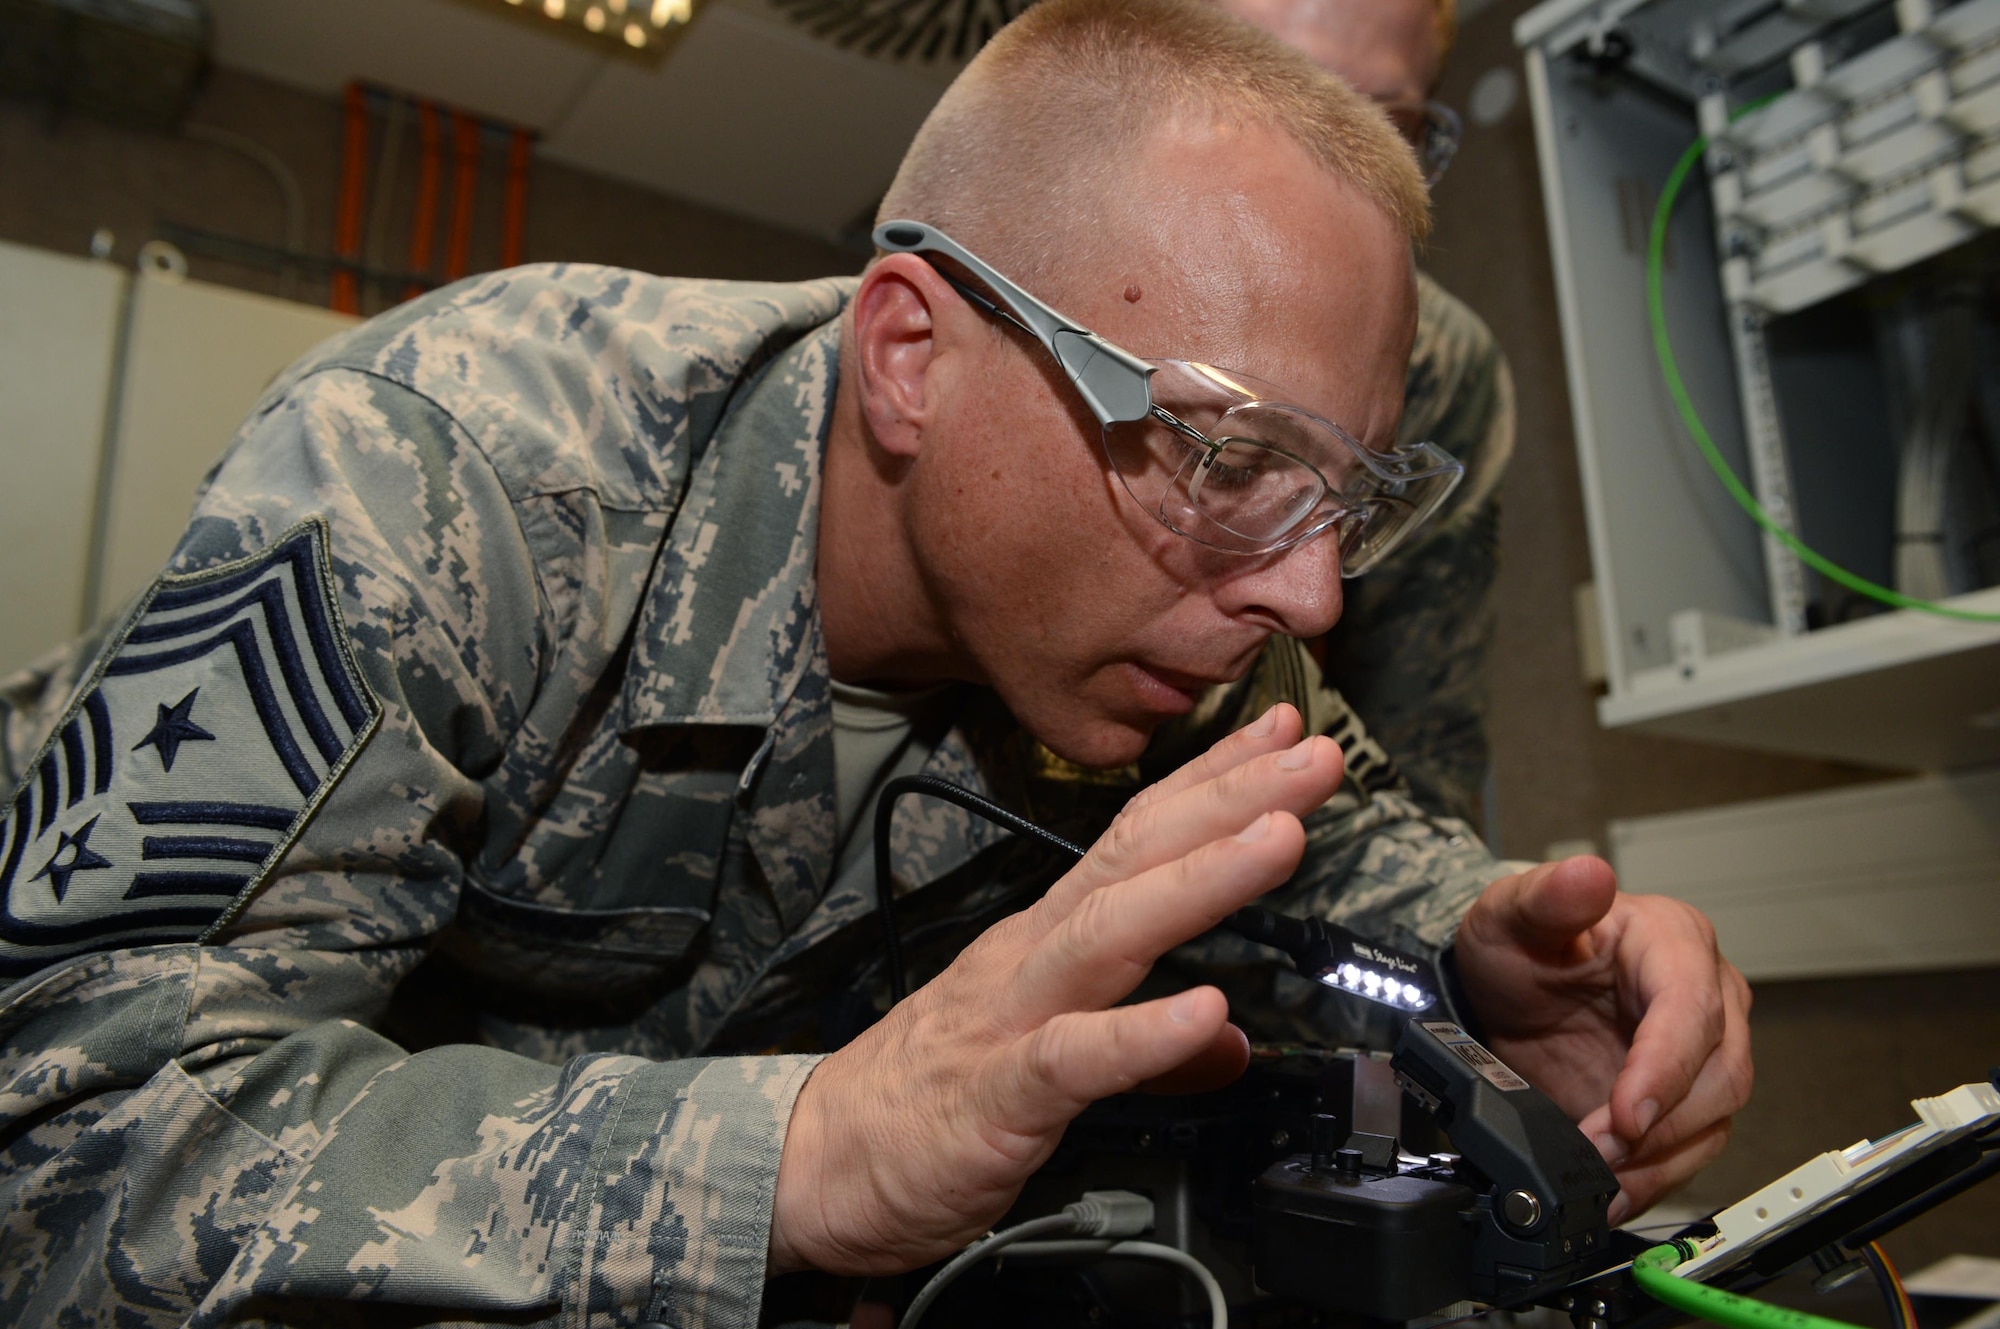 SPANGDAHLEM AIR BASE, Germany – U.S. Air Force Chief Master Sgt. Matthew Grengs, 52nd Fighter Wing command chief master sergeant, cuts a strand of fiber optic cable Aug. 14, 2013. A single strand of fiber optic cable can replace a 36 hundred pair cable, which is a copper based wire used for connecting communication networks. (U.S. Air Force photo by Airman 1st Class Kyle Gese/Released)